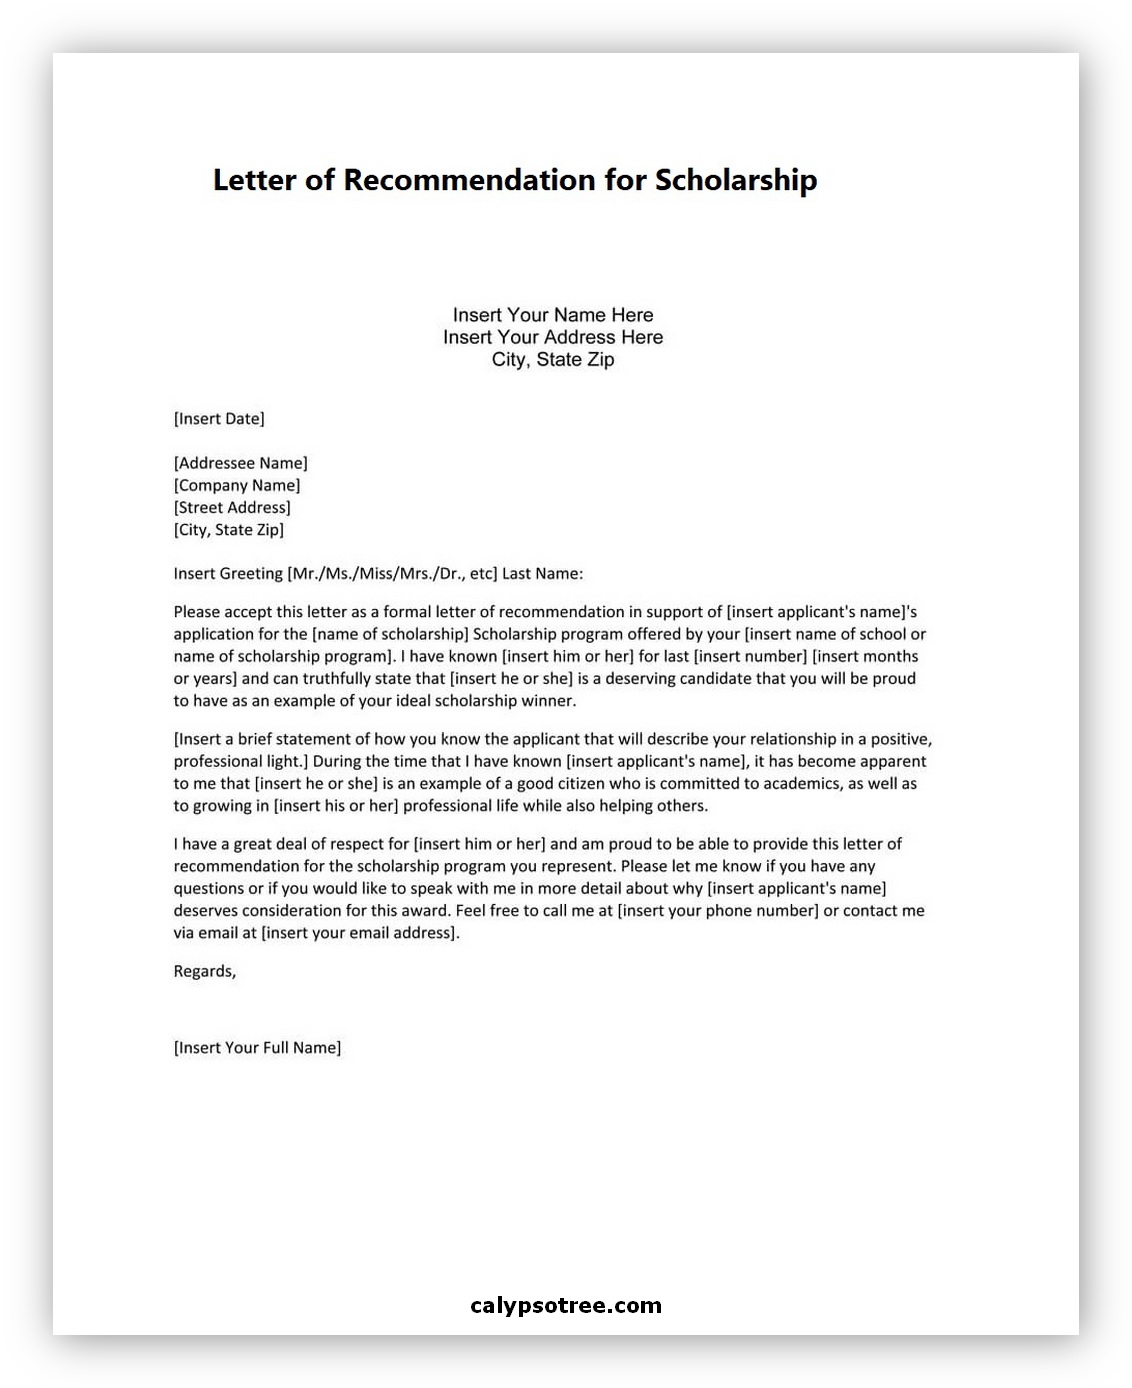 Letter of Recommendation for Scholarship 03